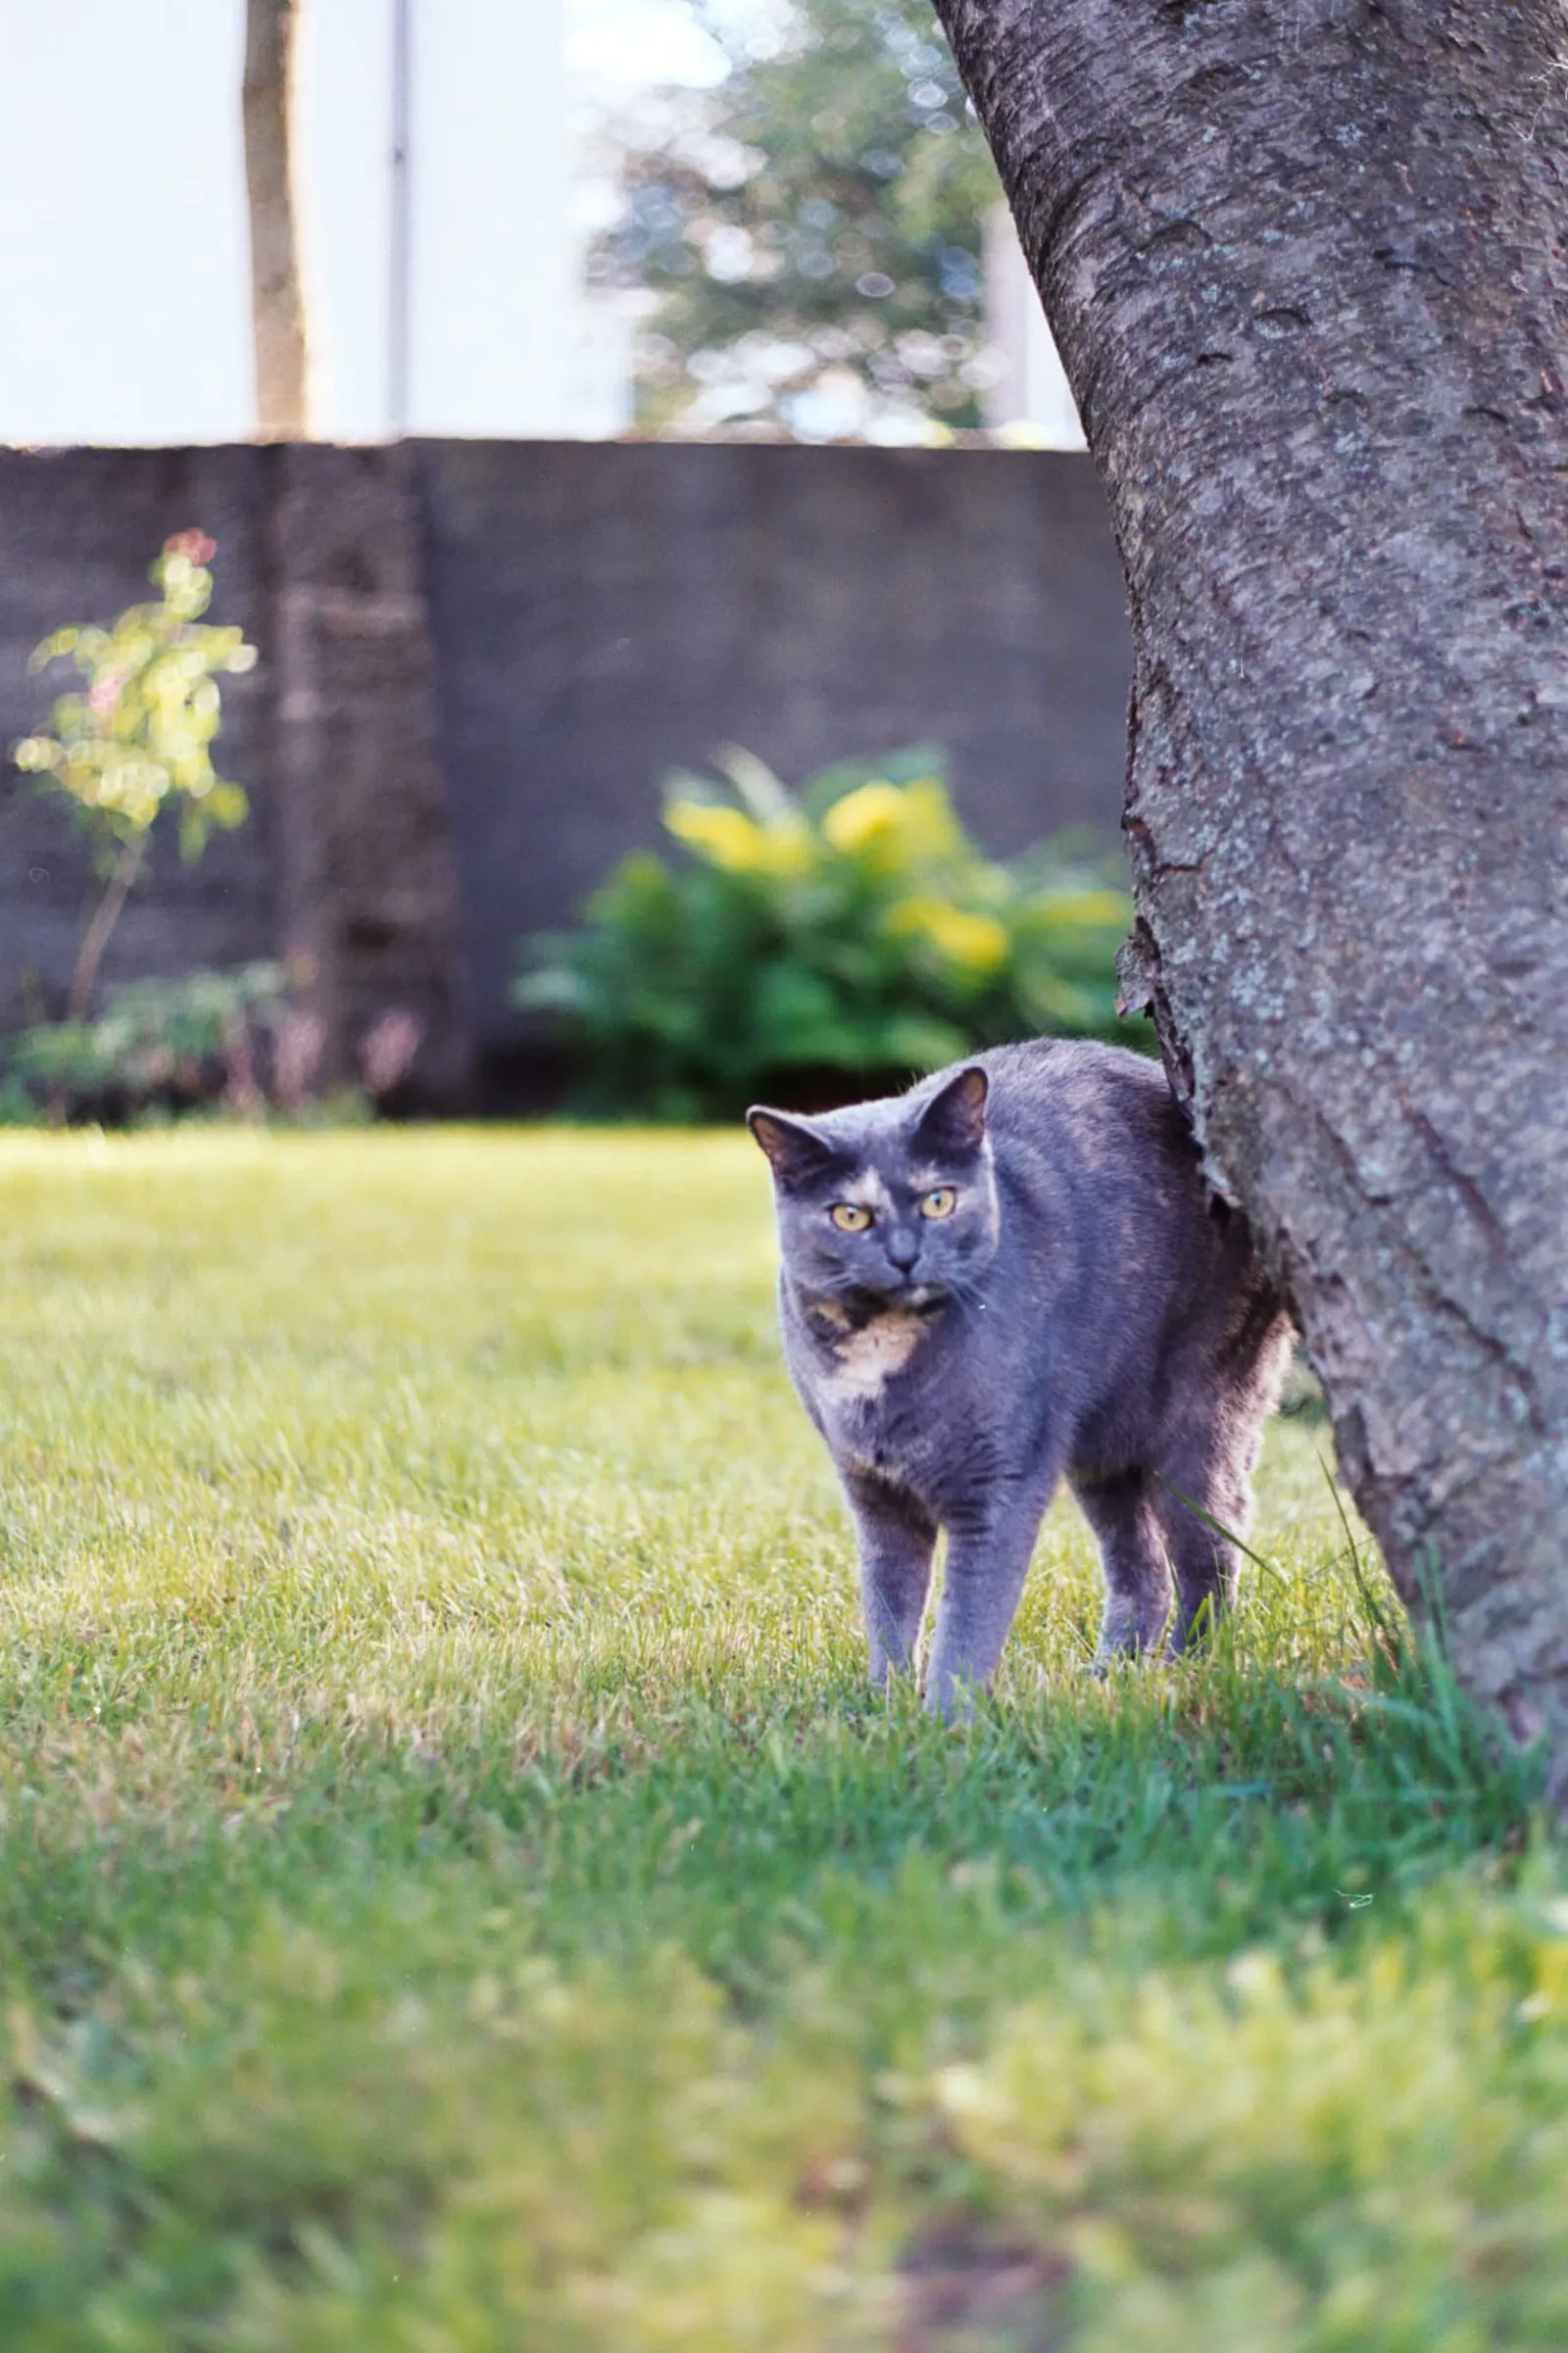 A grey and white cat peaks out from behind a tree